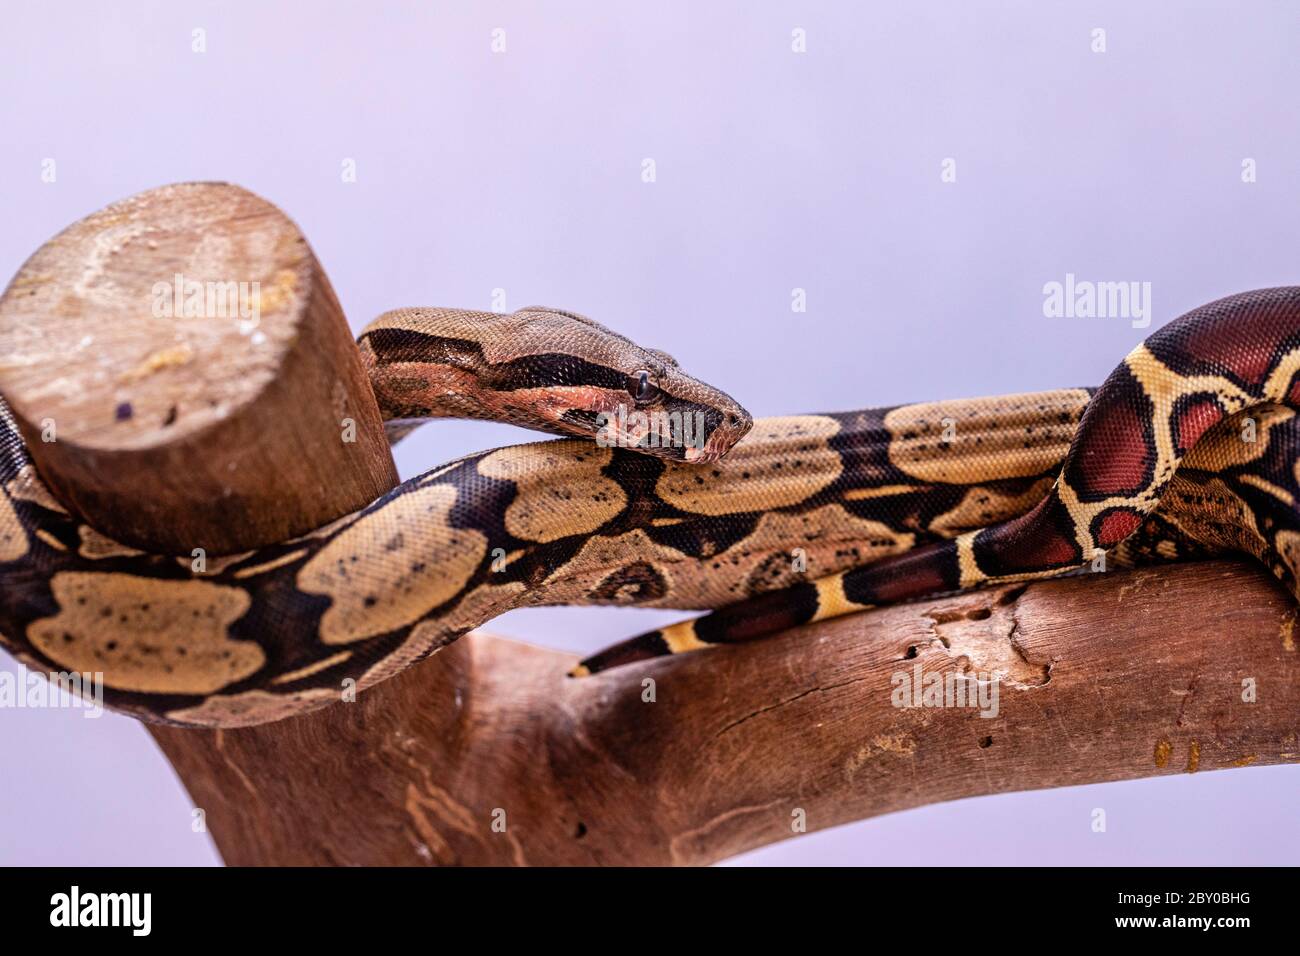 The boa constrictor (Boa constrictor), also called the red-tailed boa or the common boa, is a species of large, non-venomous, heavy-bodied snake that Stock Photo